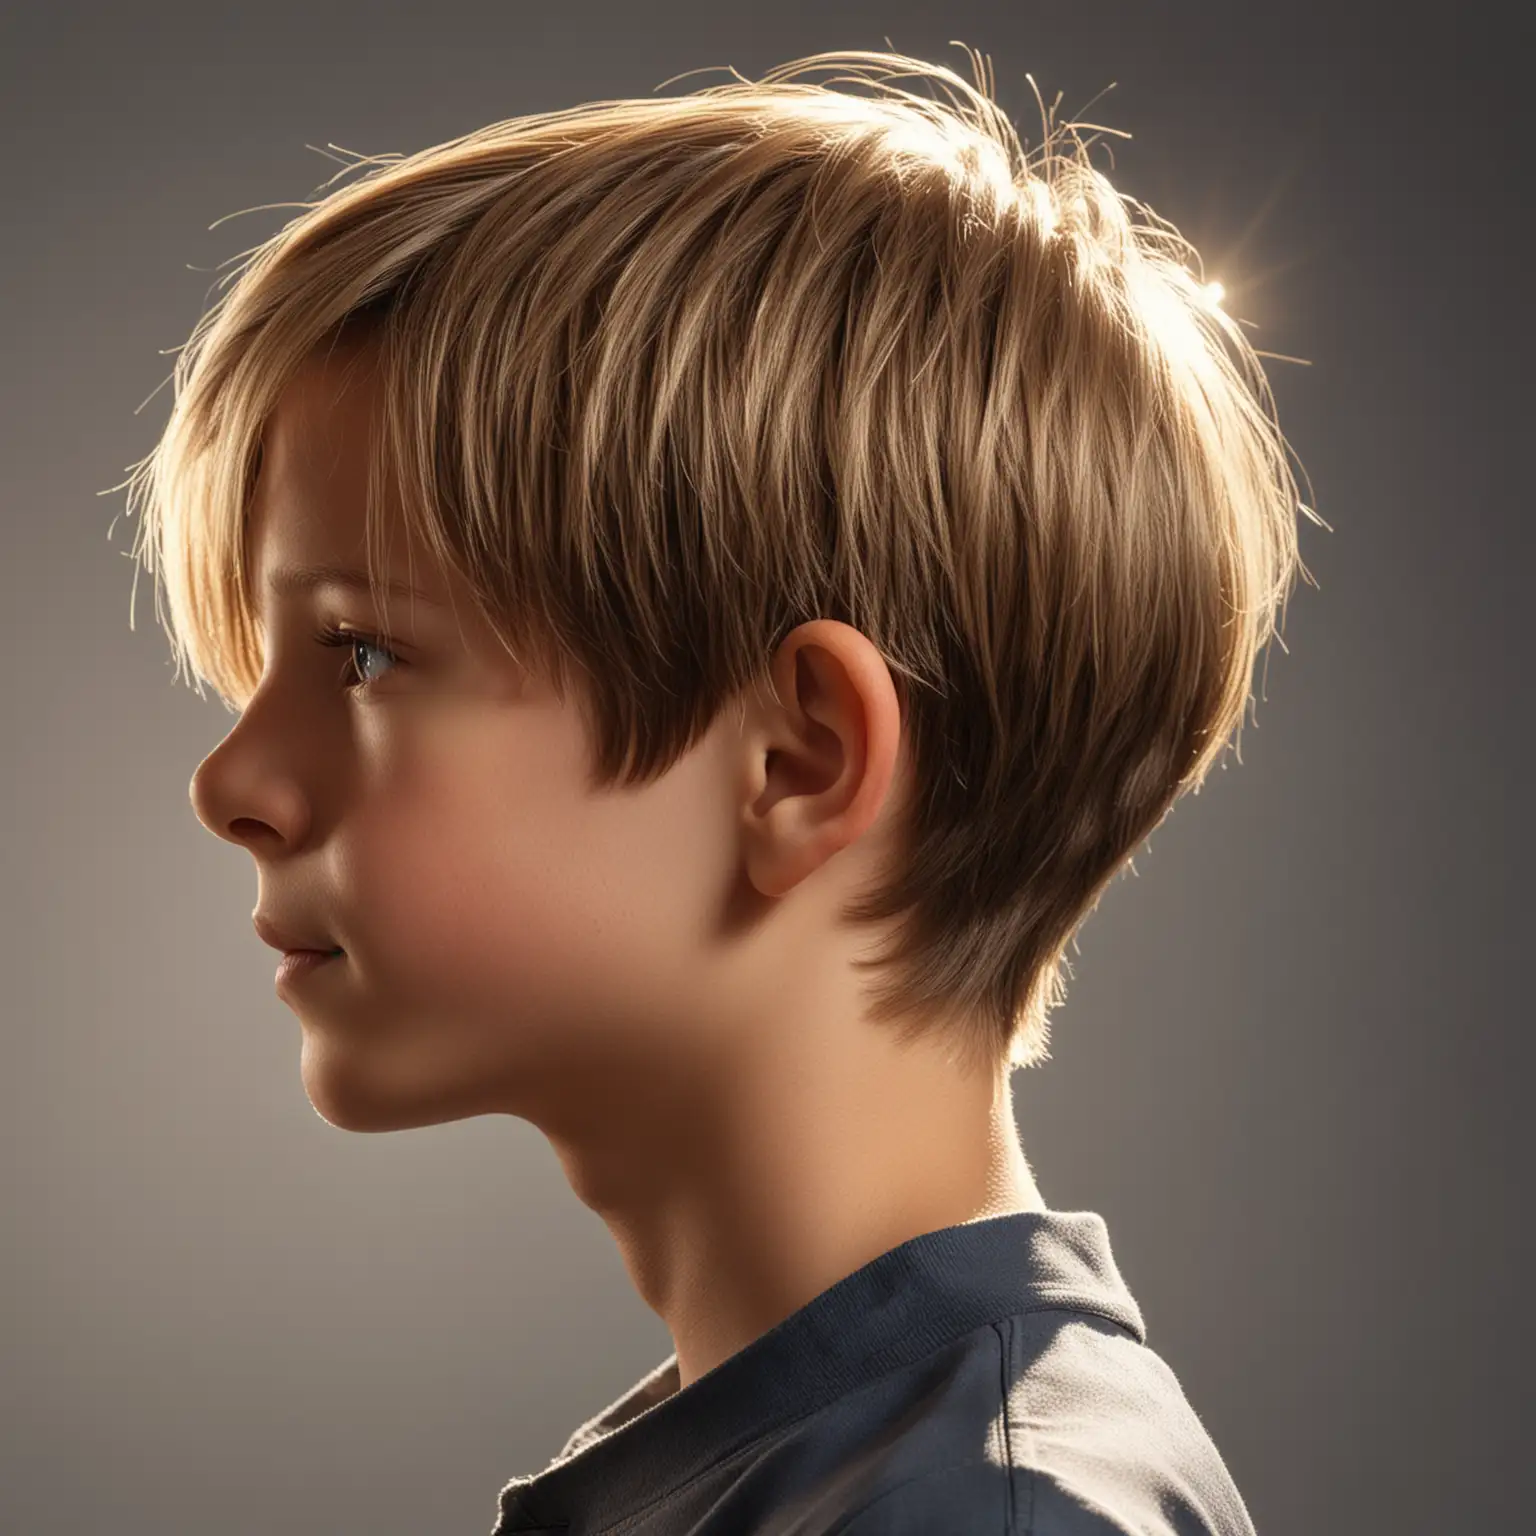 Hyper Realistic Portrait of a TwelveYearOld Boy with Smooth Shiny Hair in Sunlight